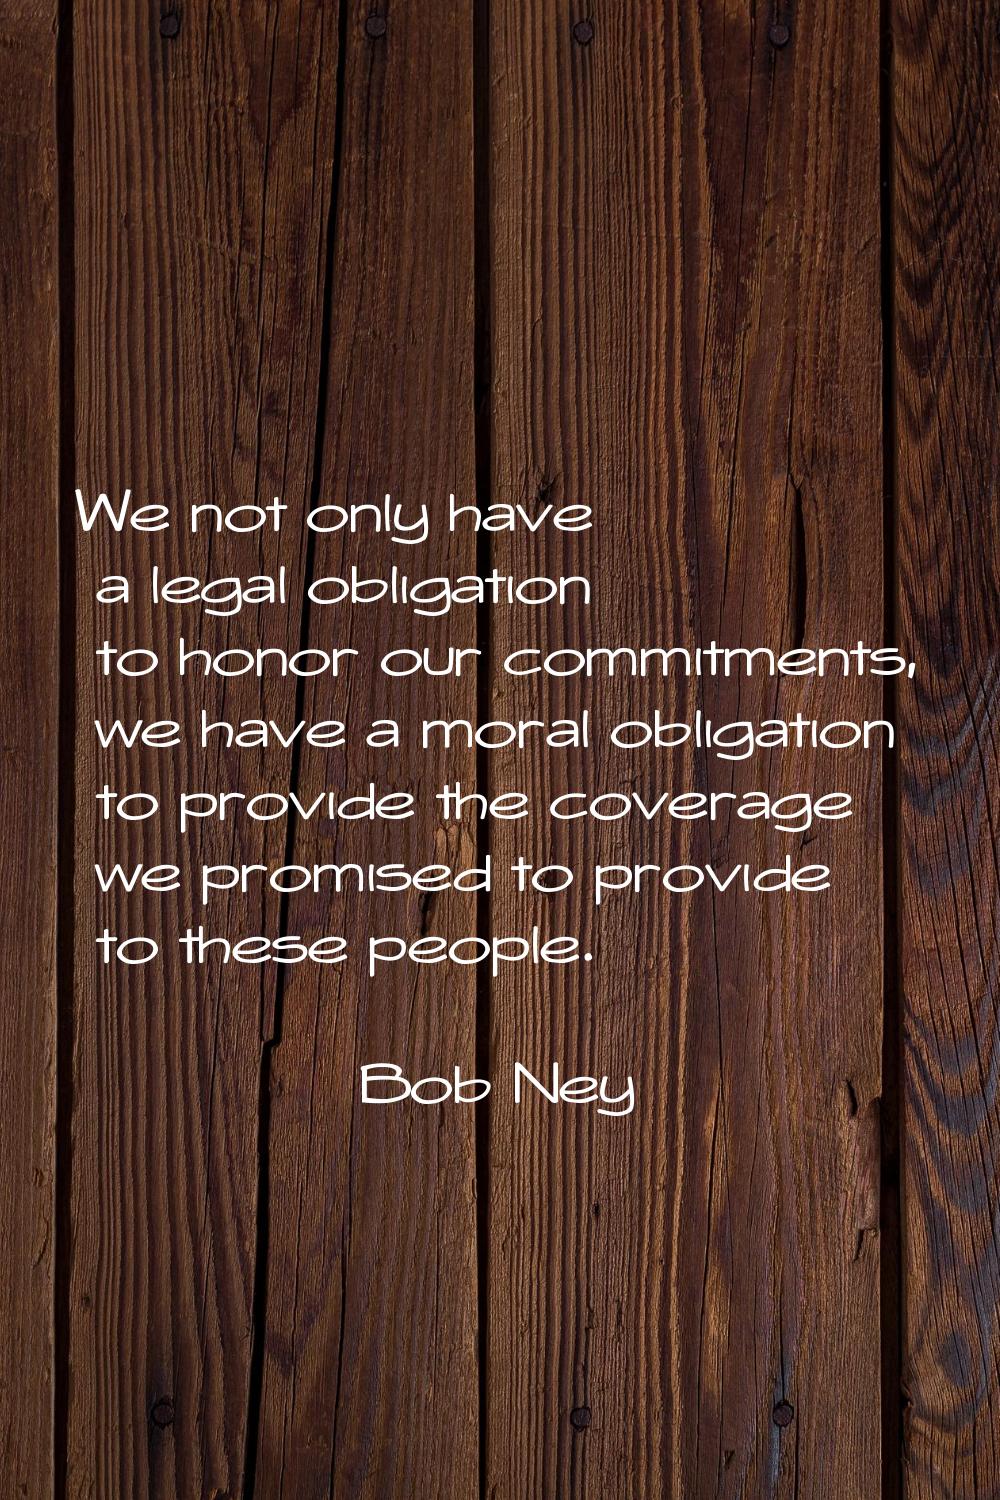 We not only have a legal obligation to honor our commitments, we have a moral obligation to provide